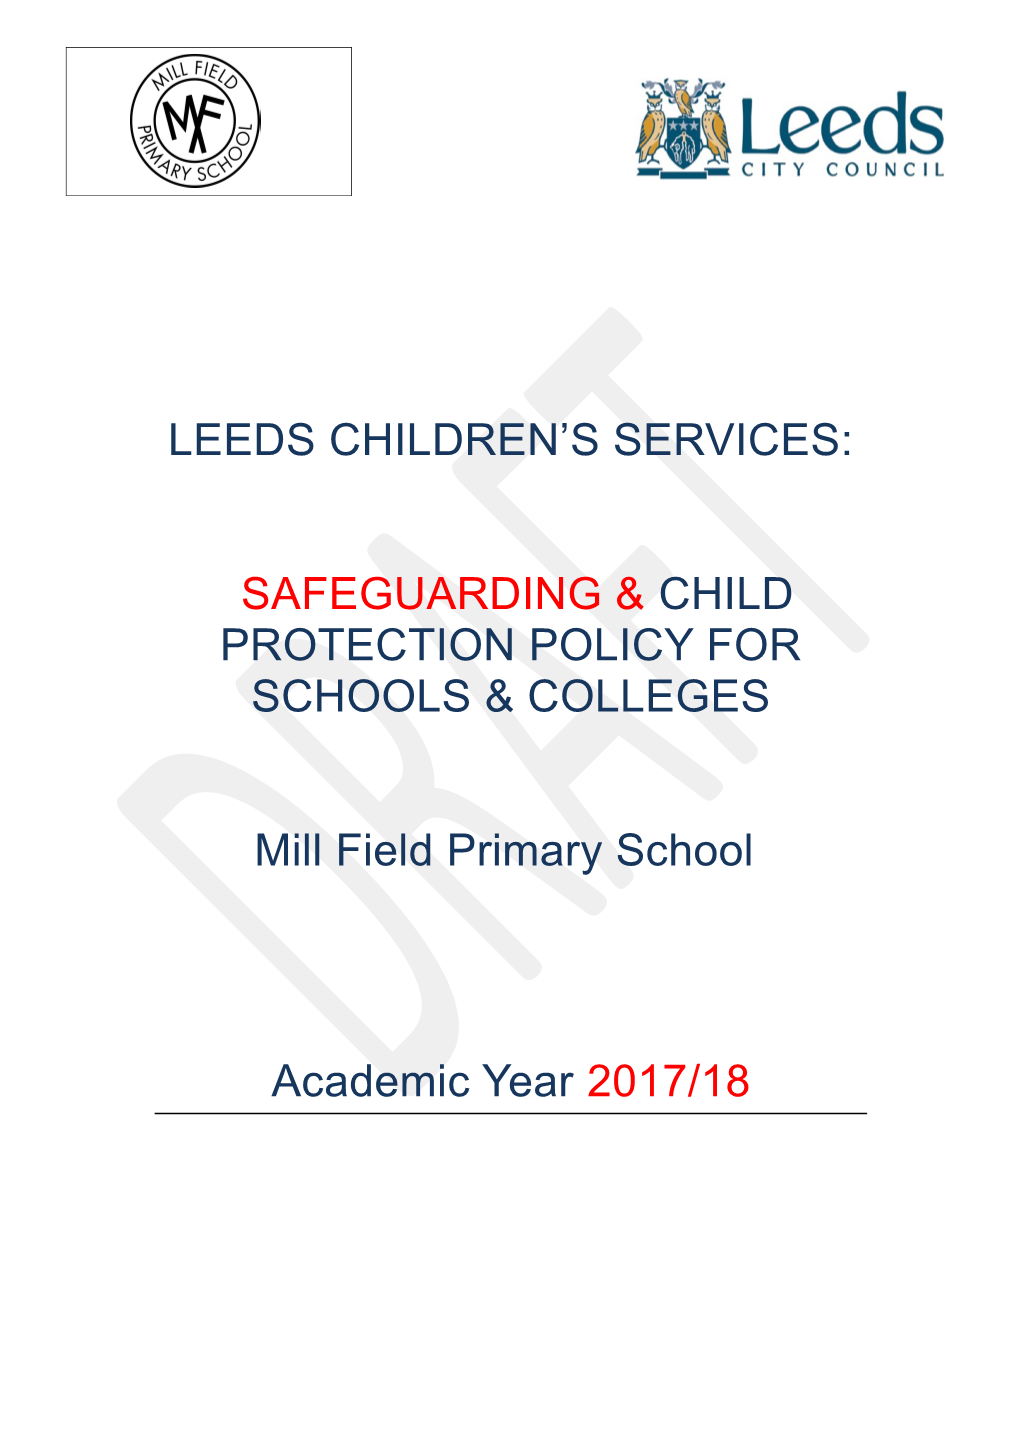 Safeguardingchild Protection Policy for Schools & Colleges